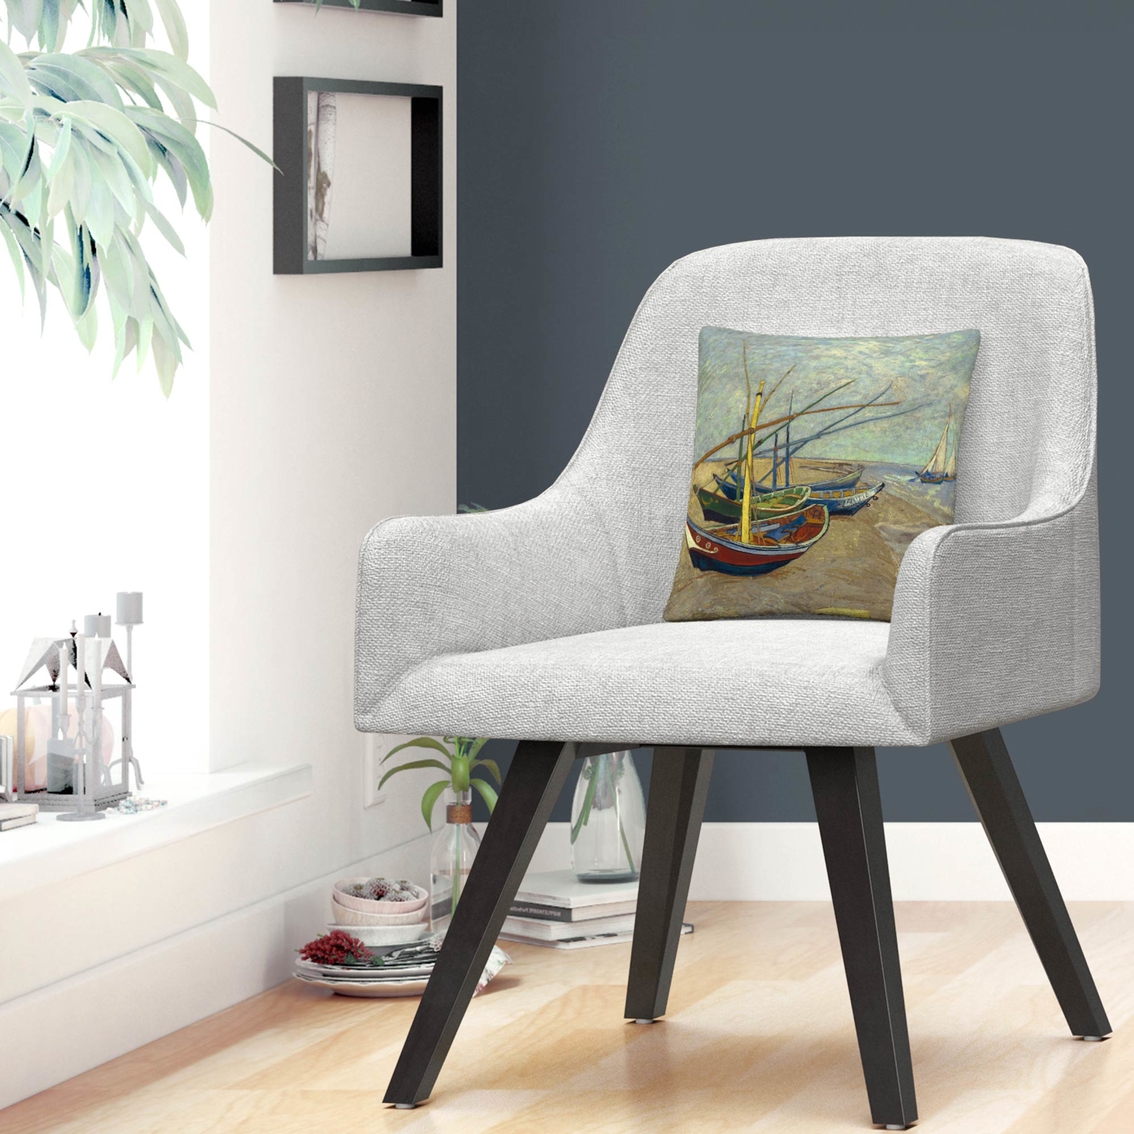 Trademark Fine Art Vincent van Gogh Fishing Boats on the Beach Throw Pillow - Image 3 of 3